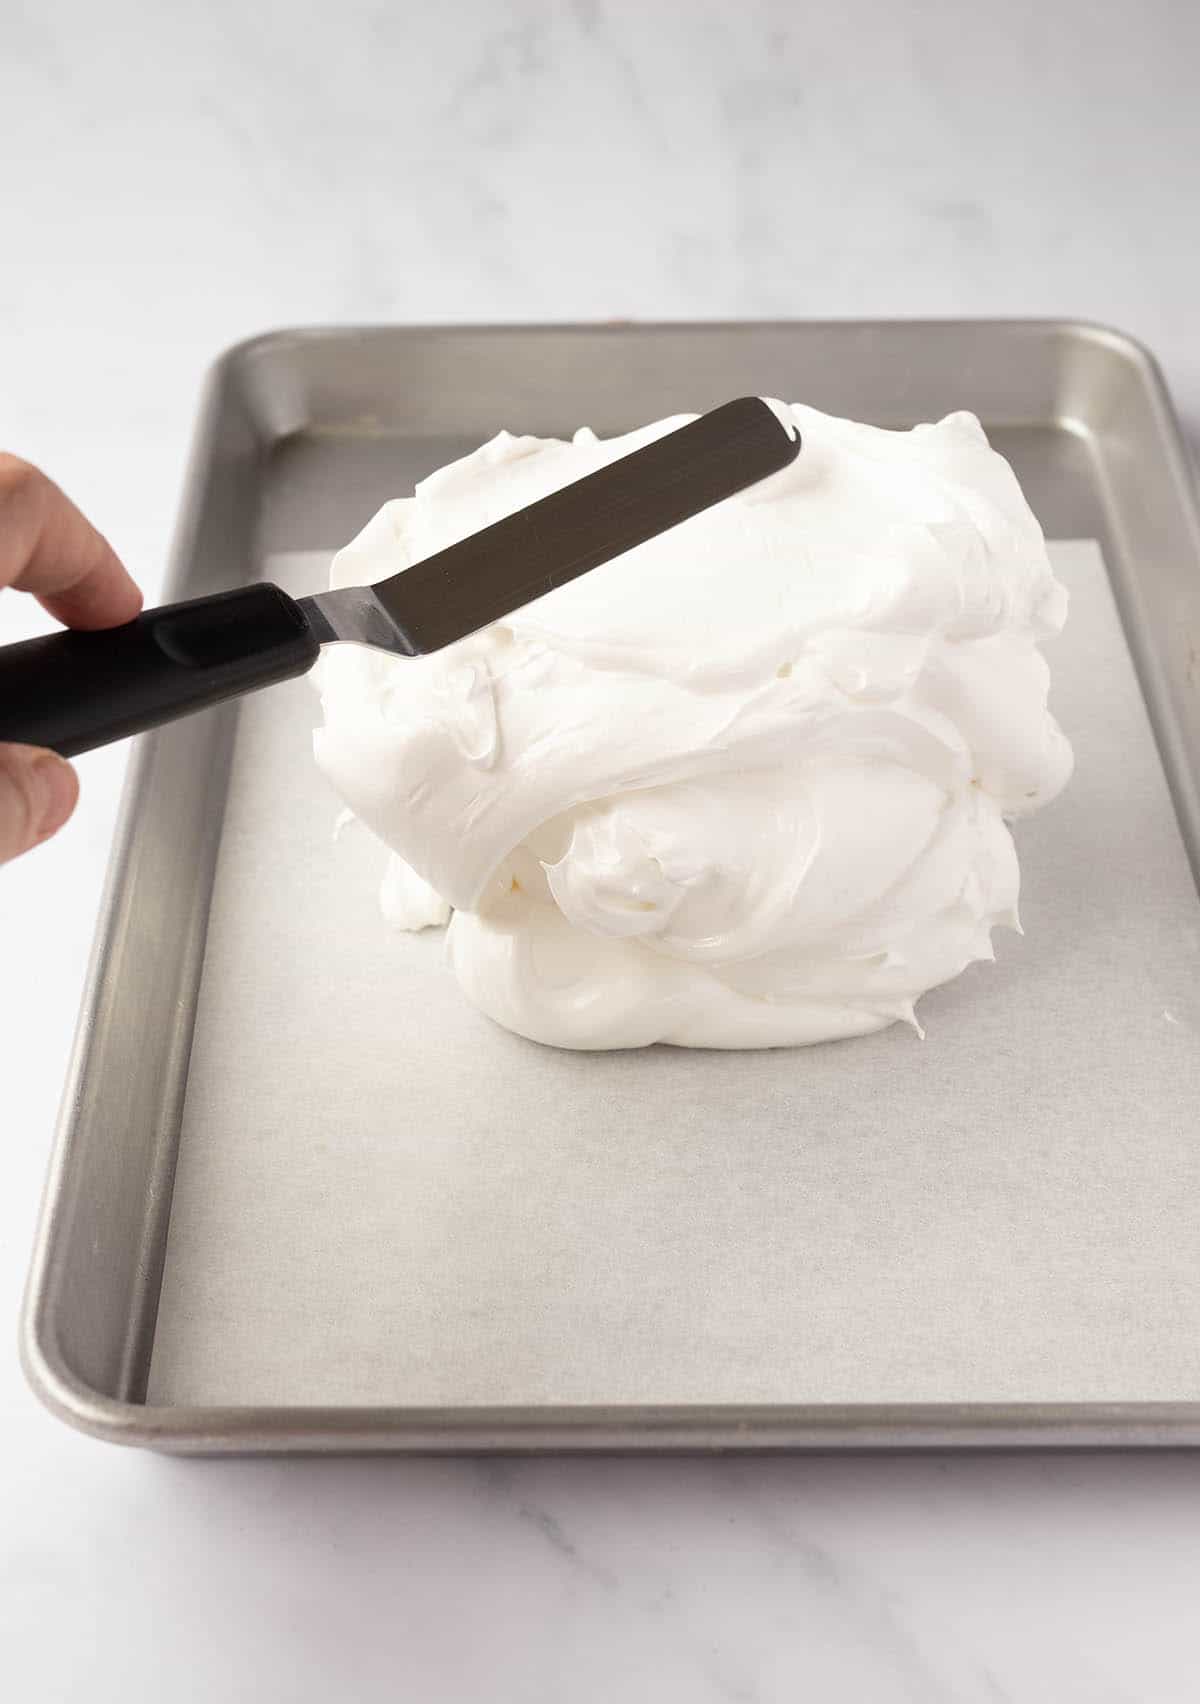 A baking tray topped with meringue with a hand showing how to smooth it out.